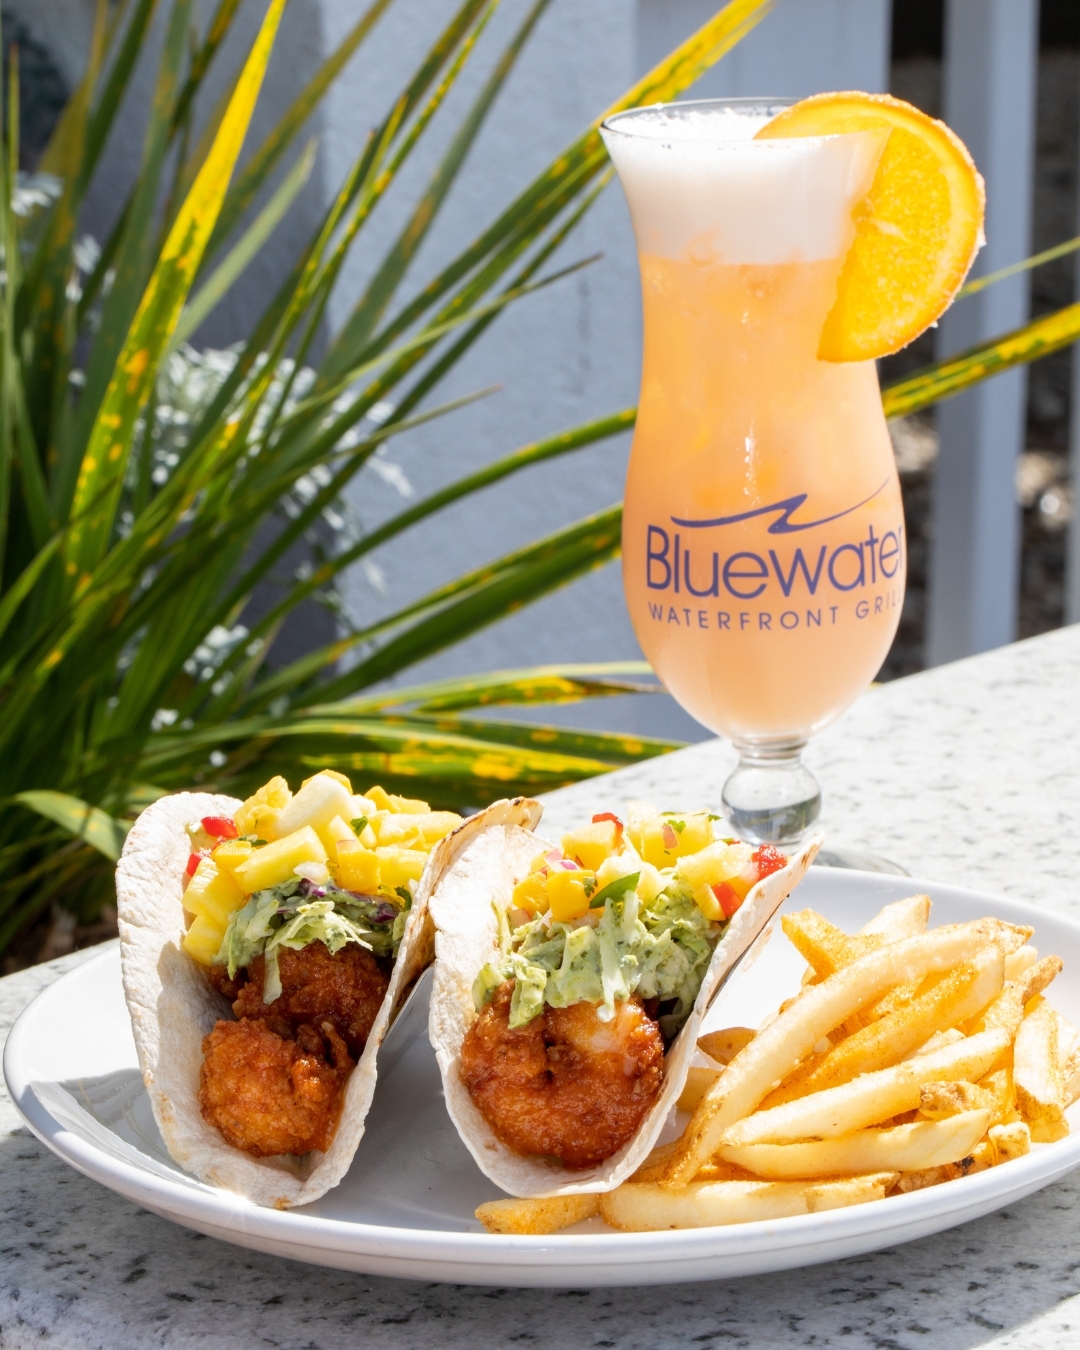 white plate with two fish tacos and fries in front of a citrus cocktail in a flute glass. credit: Bluewater Grill Instagram